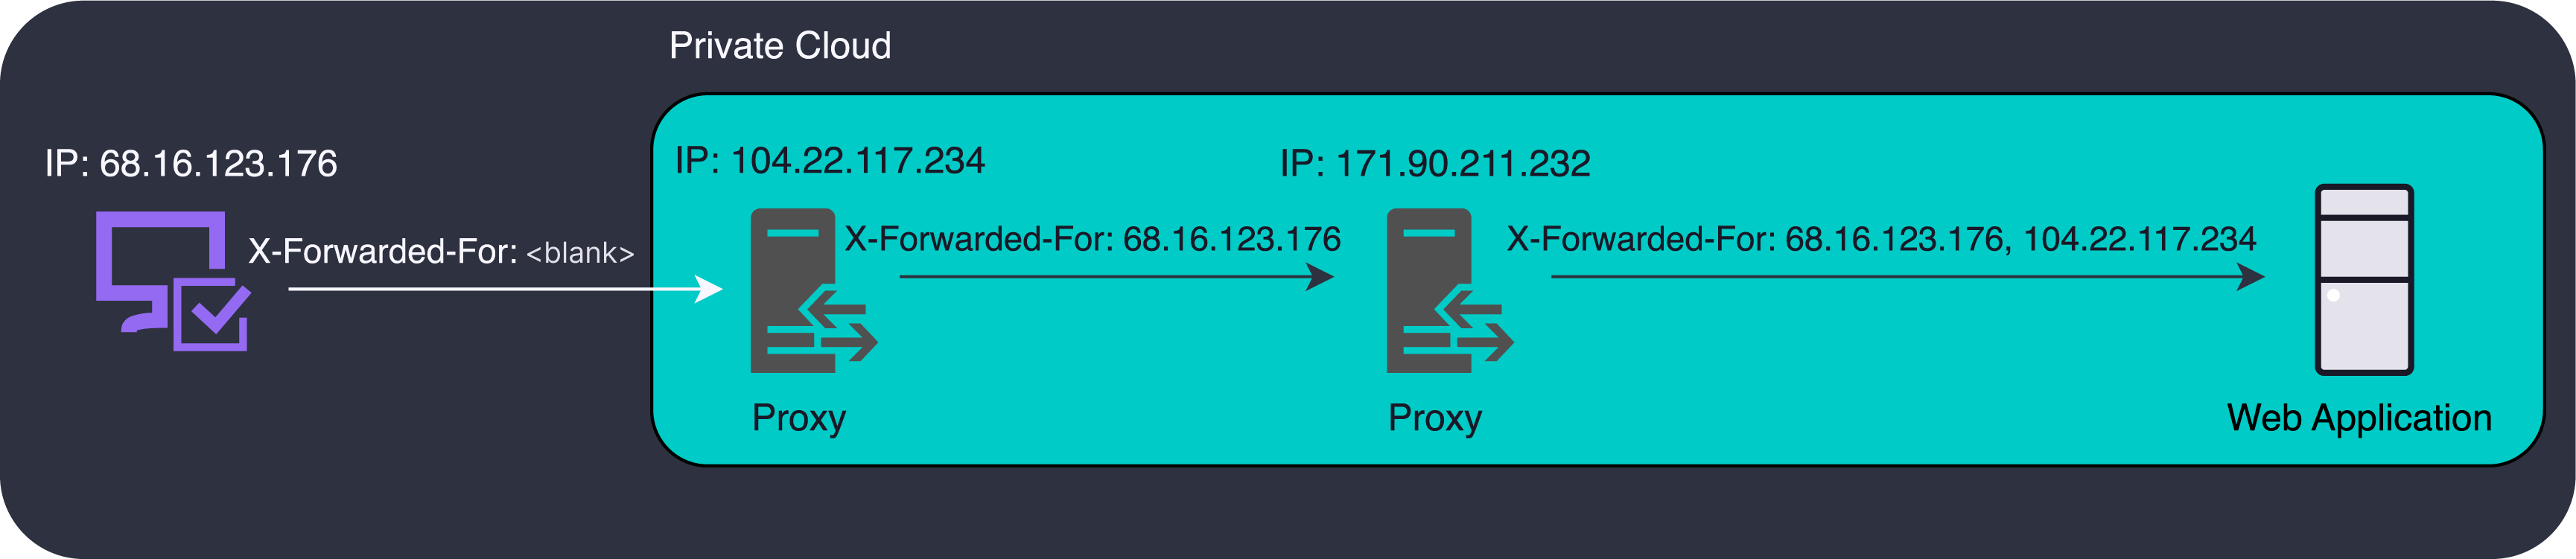 Illustration showing how the X-Forwarded-For header gets created as a request passes through proxy servers. image